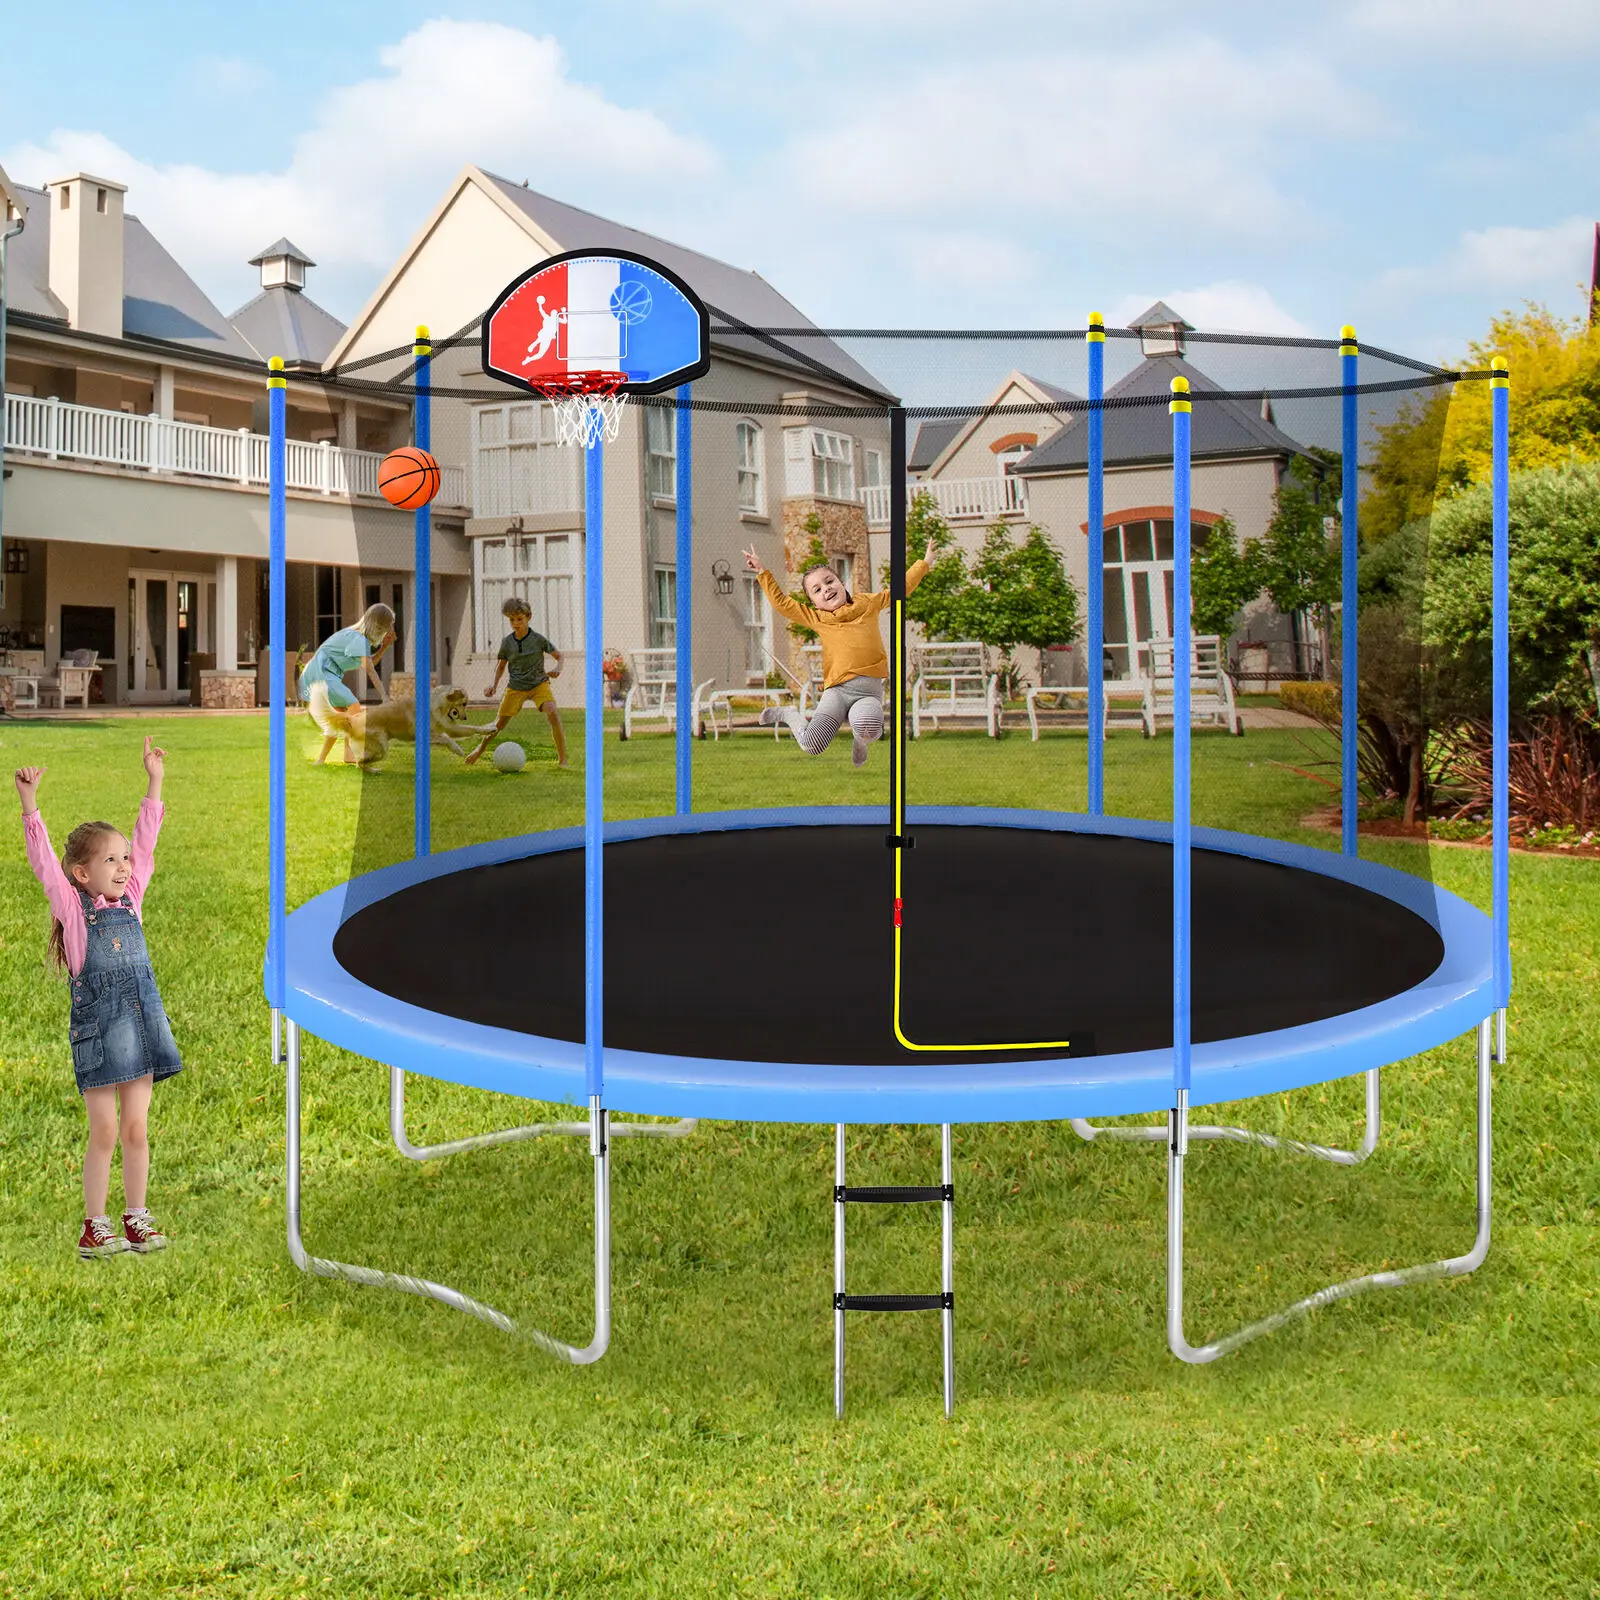 

12FT Trampoline for Kids with Safety Enclosure Net, Basketball Hoop and Ladder